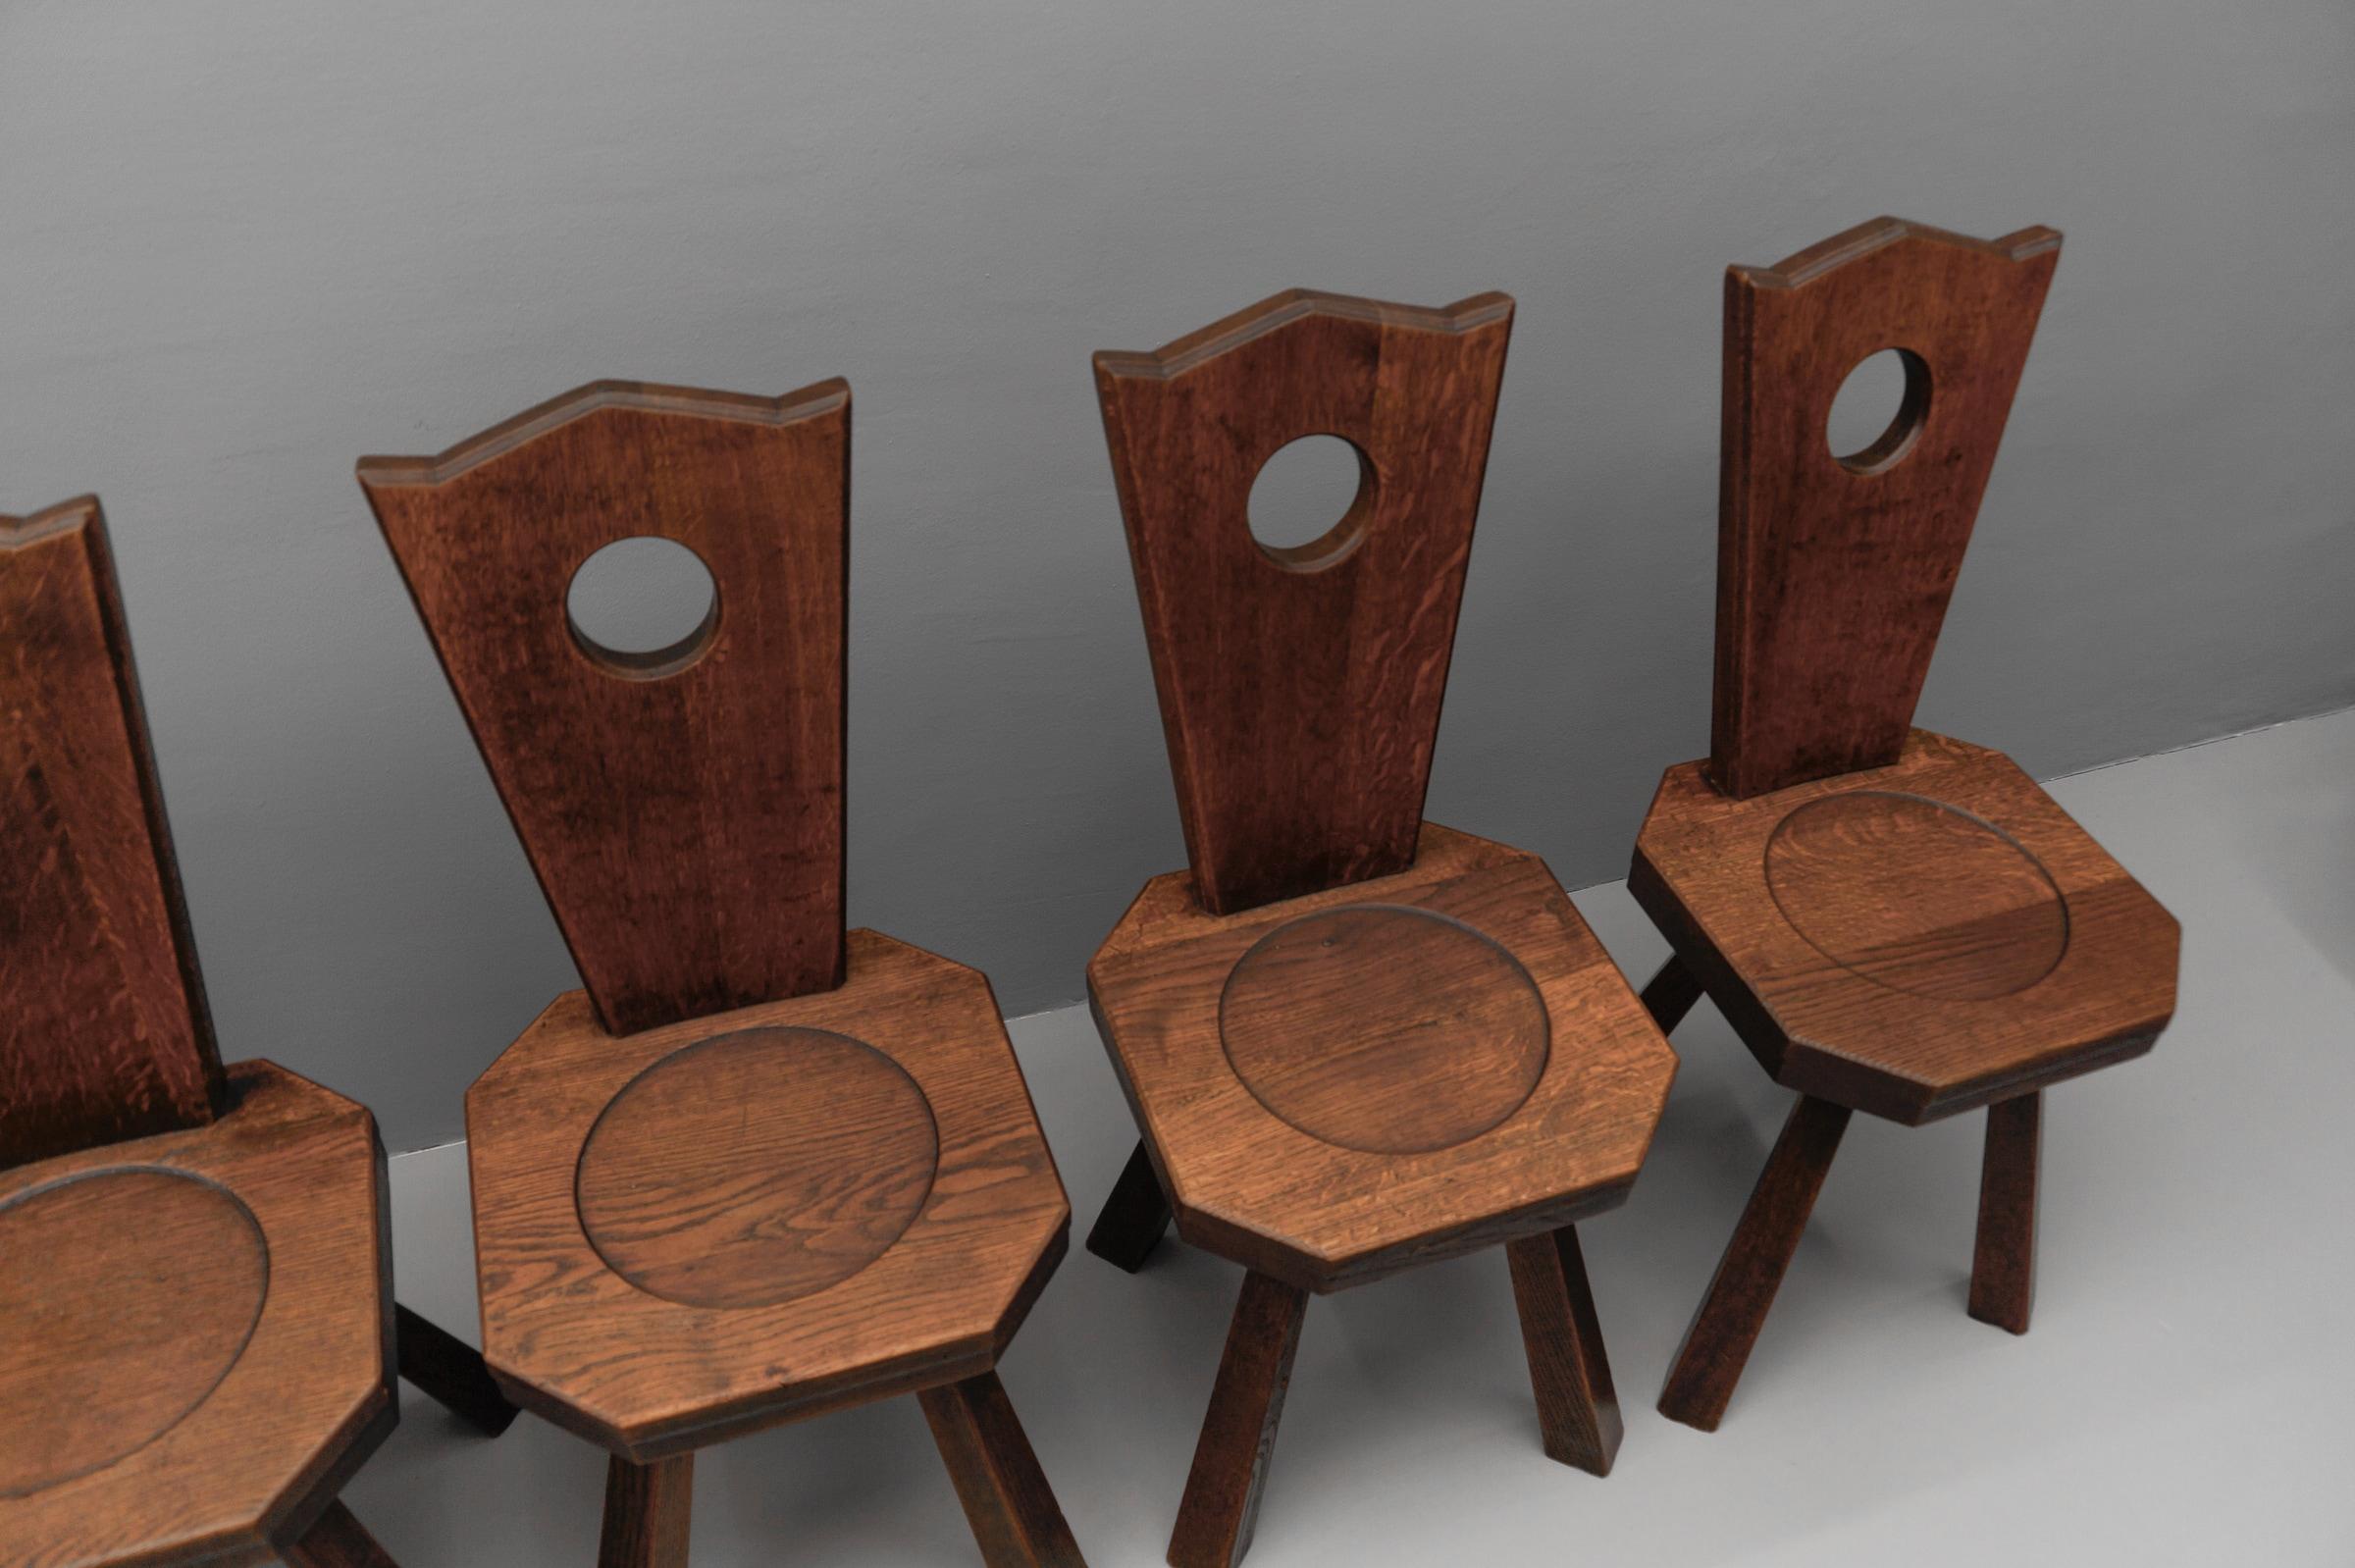 Set of 6 French Provincial Brutalist Rustic Oak Chairs, 1960s France For Sale 14